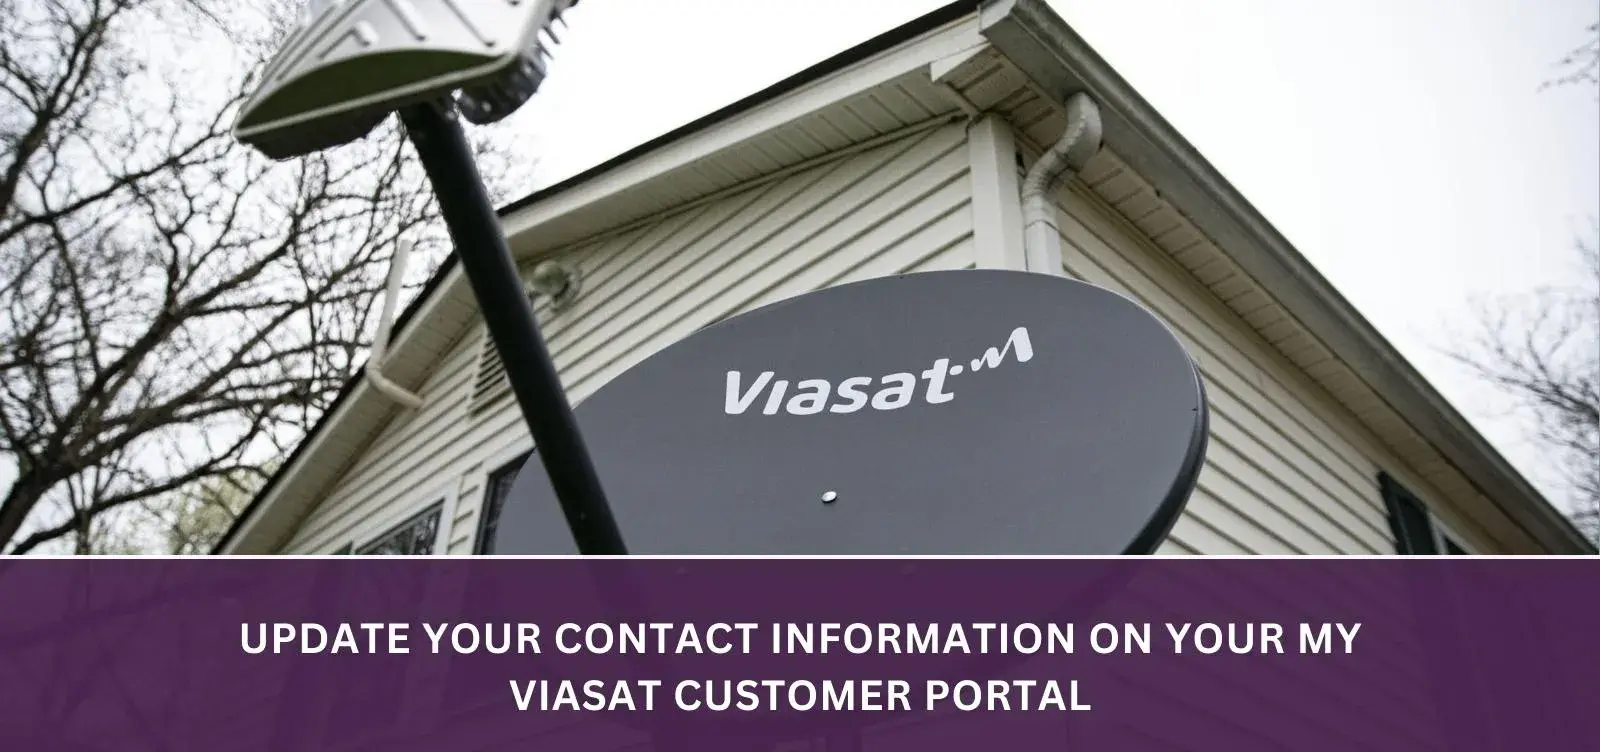 Update your contact information on your My Viasat customer portal